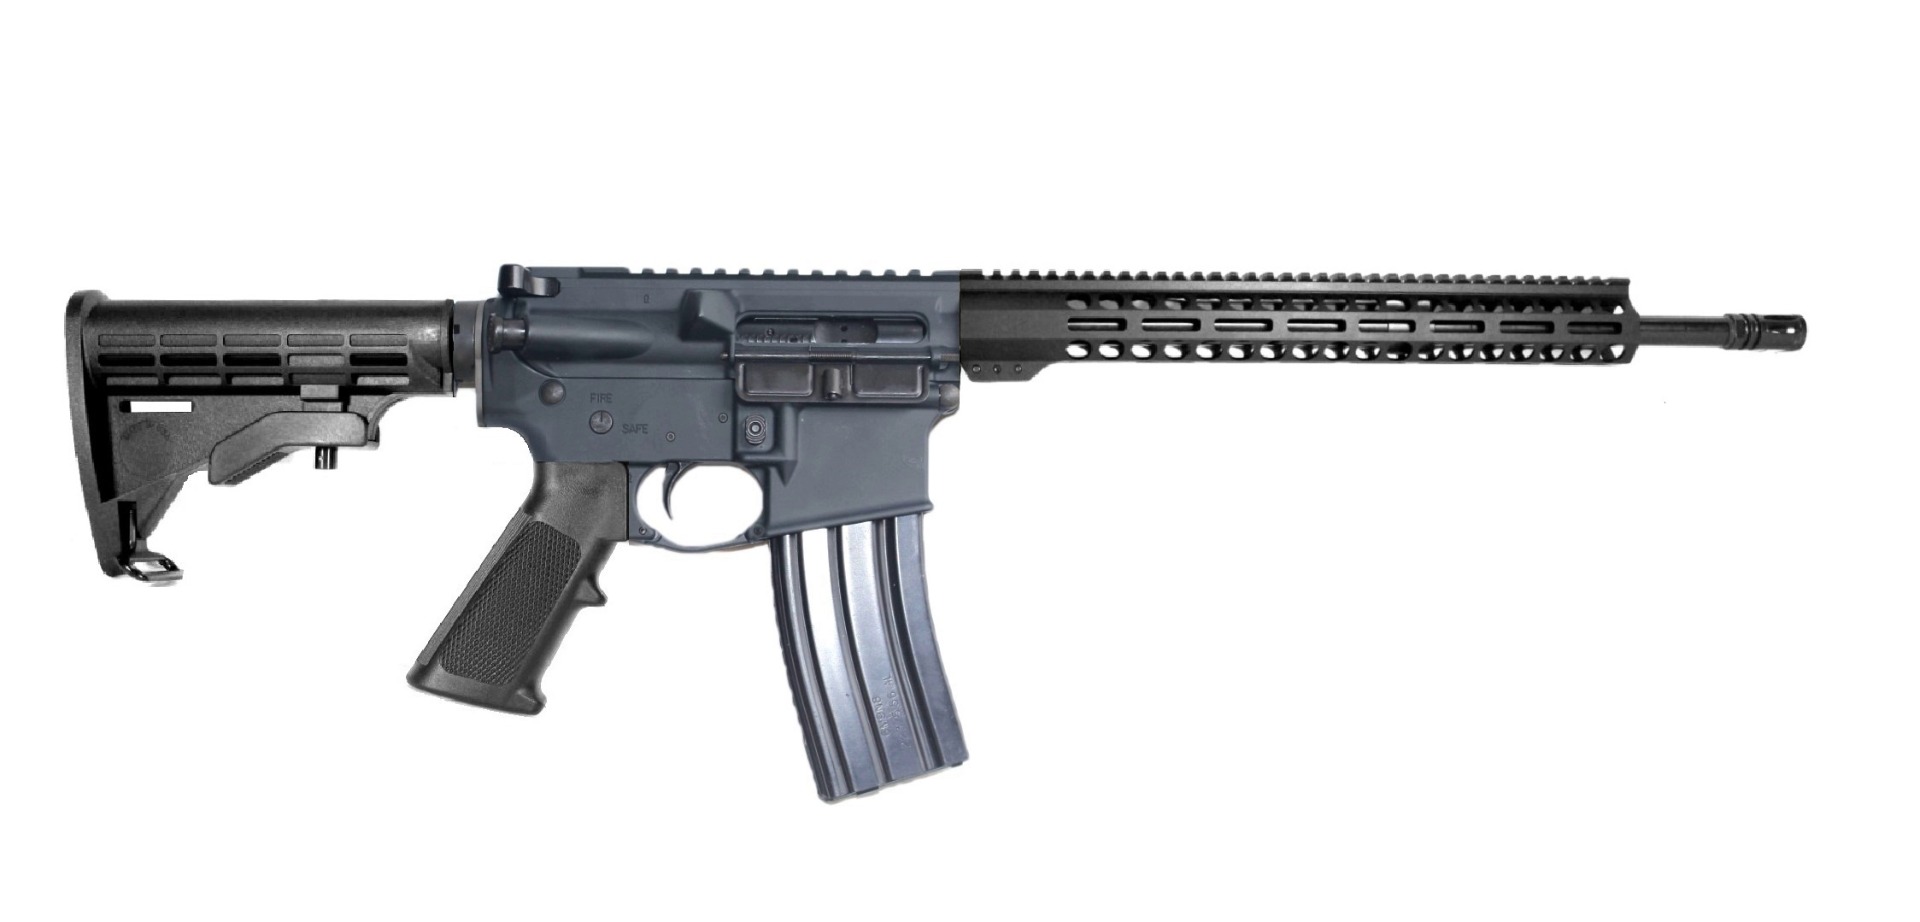 18 inch 450 Bushmaster AR-15 Rifle | Made in the USA 